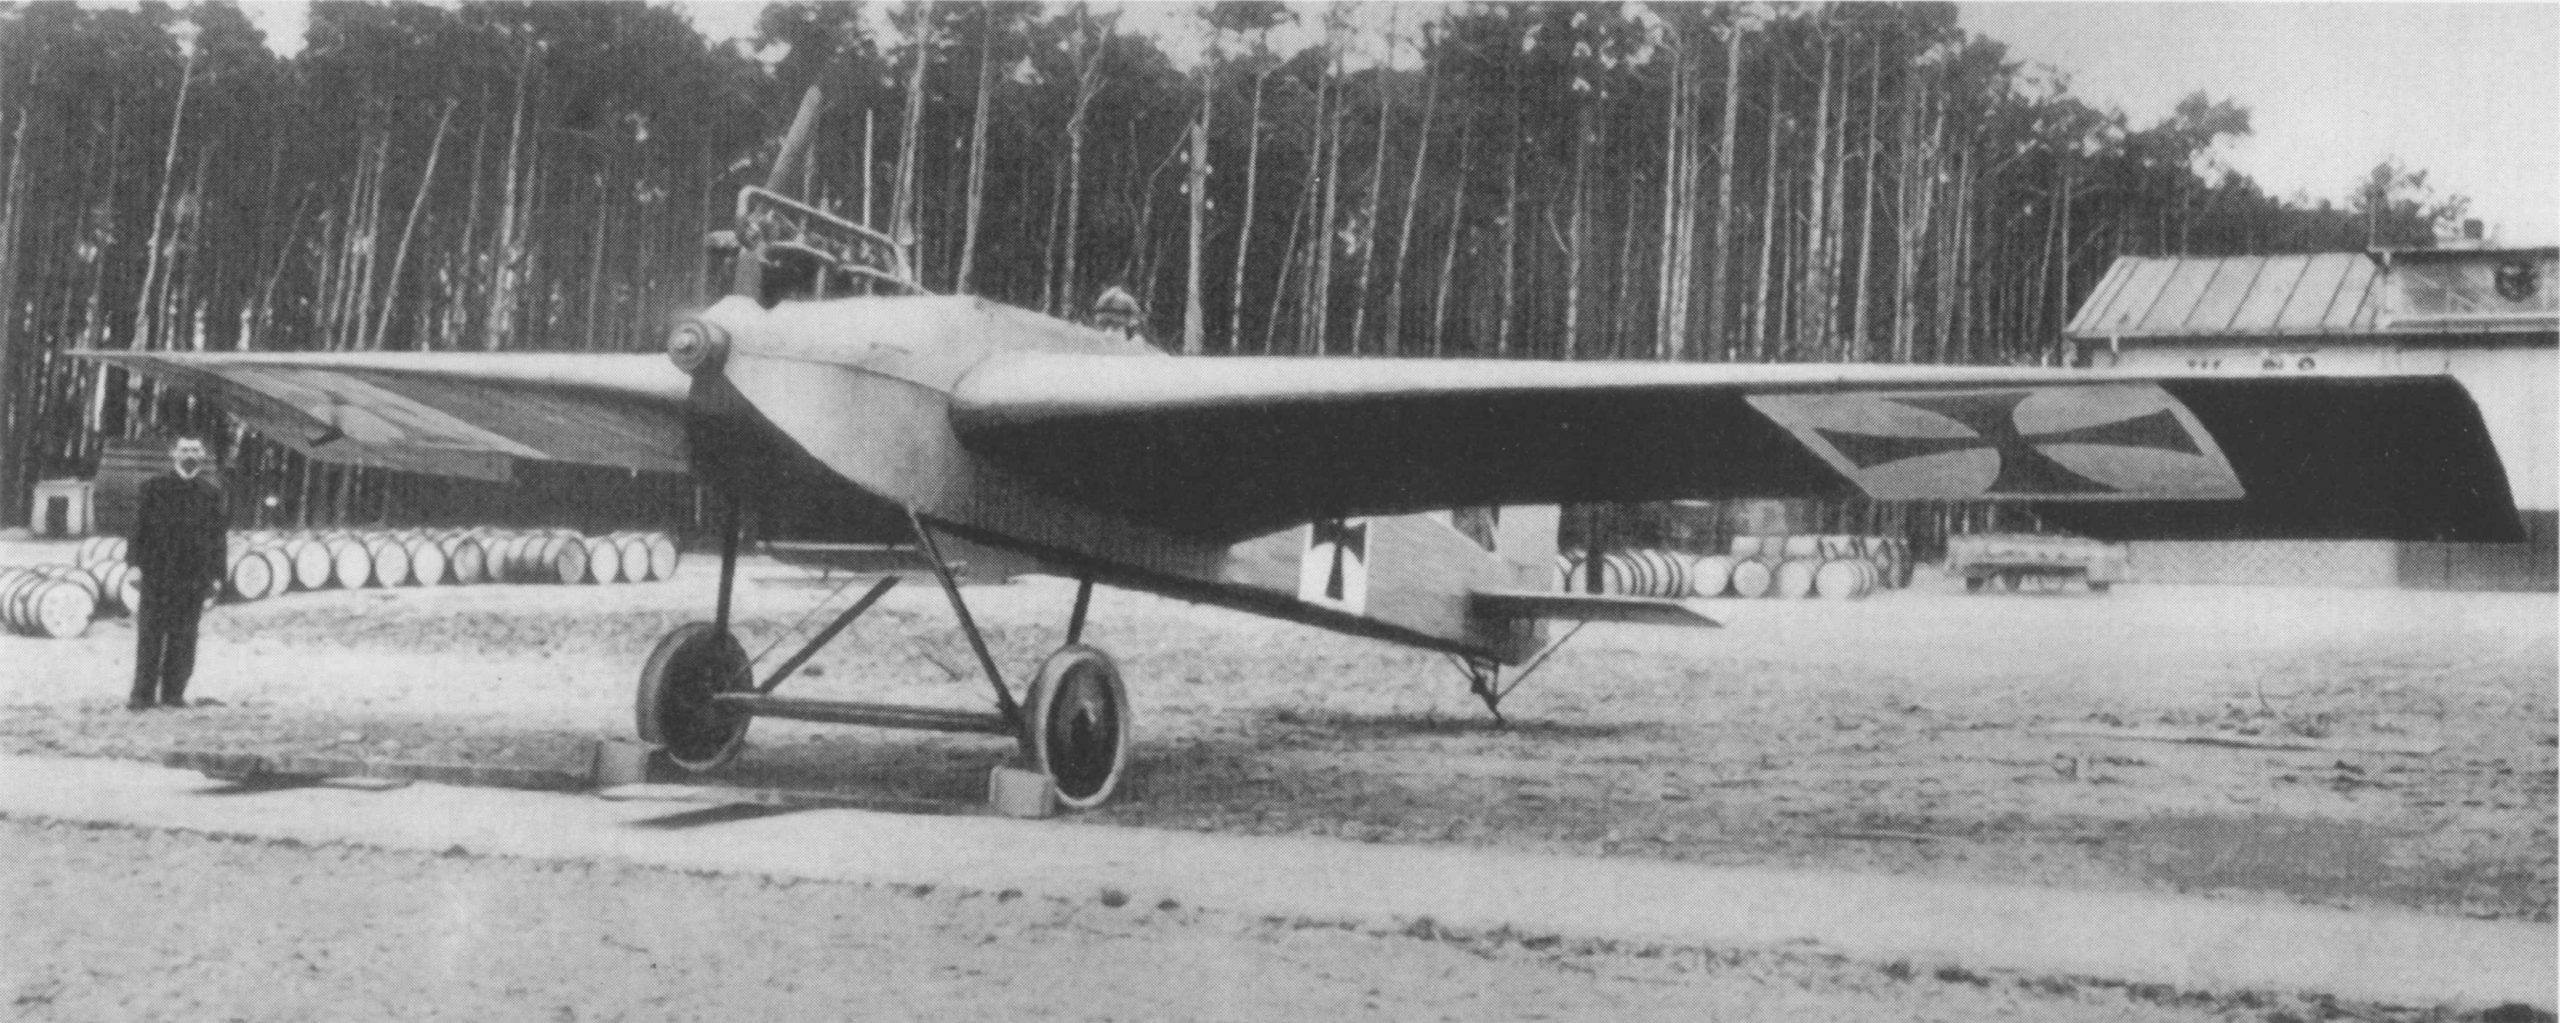 A black and white photograph of an monoplane with cross emblems on the wings and fuselage.